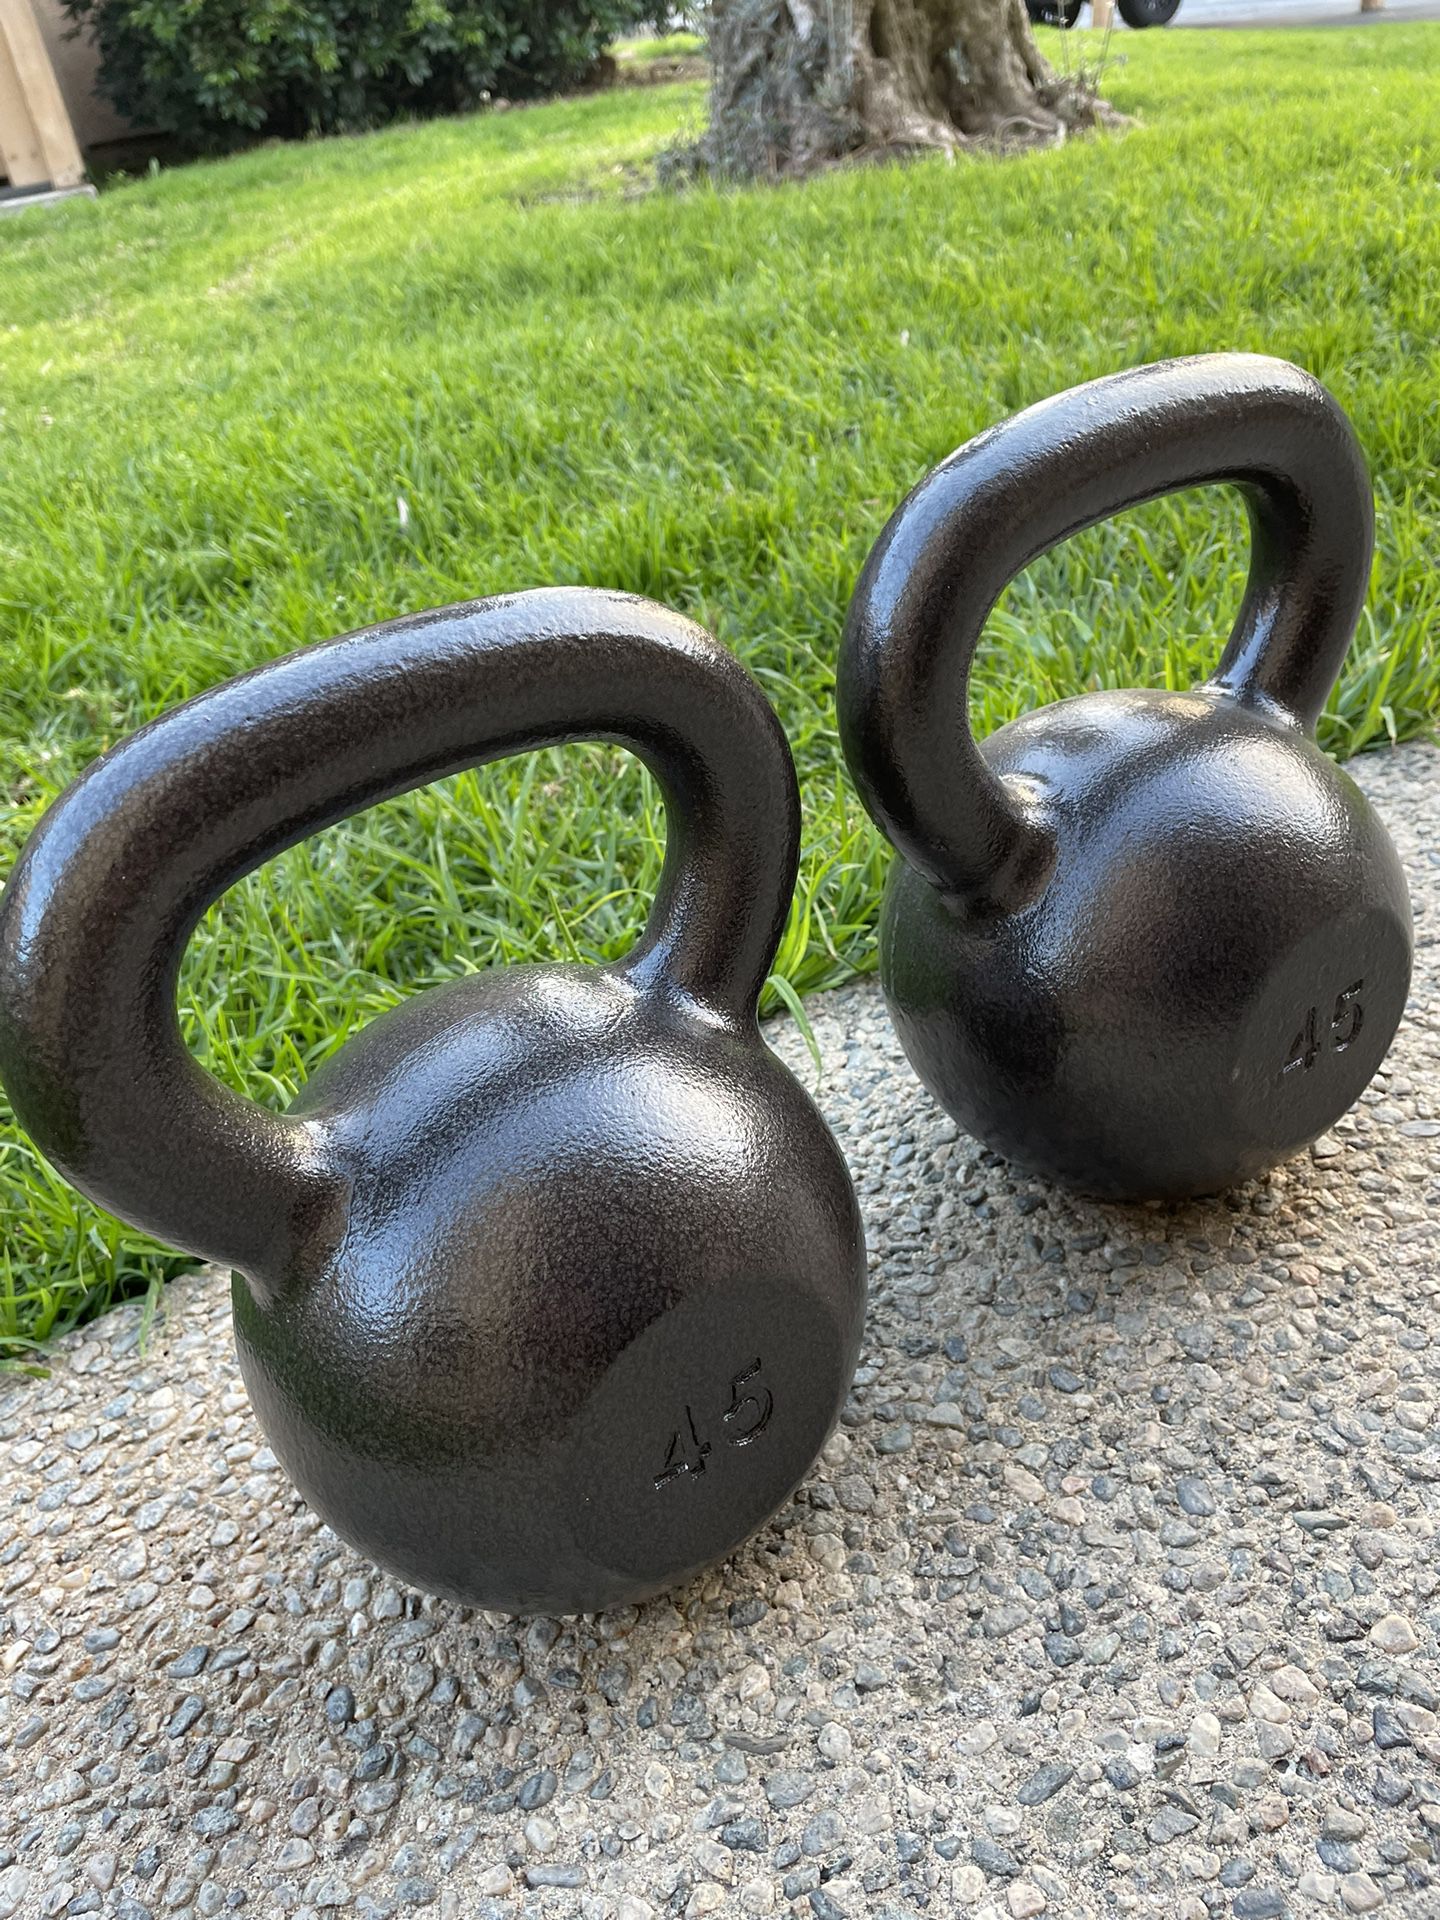 2x45 Lb Kettle Bell Weights $70 For Both Or $40 Each BRAND NEW 